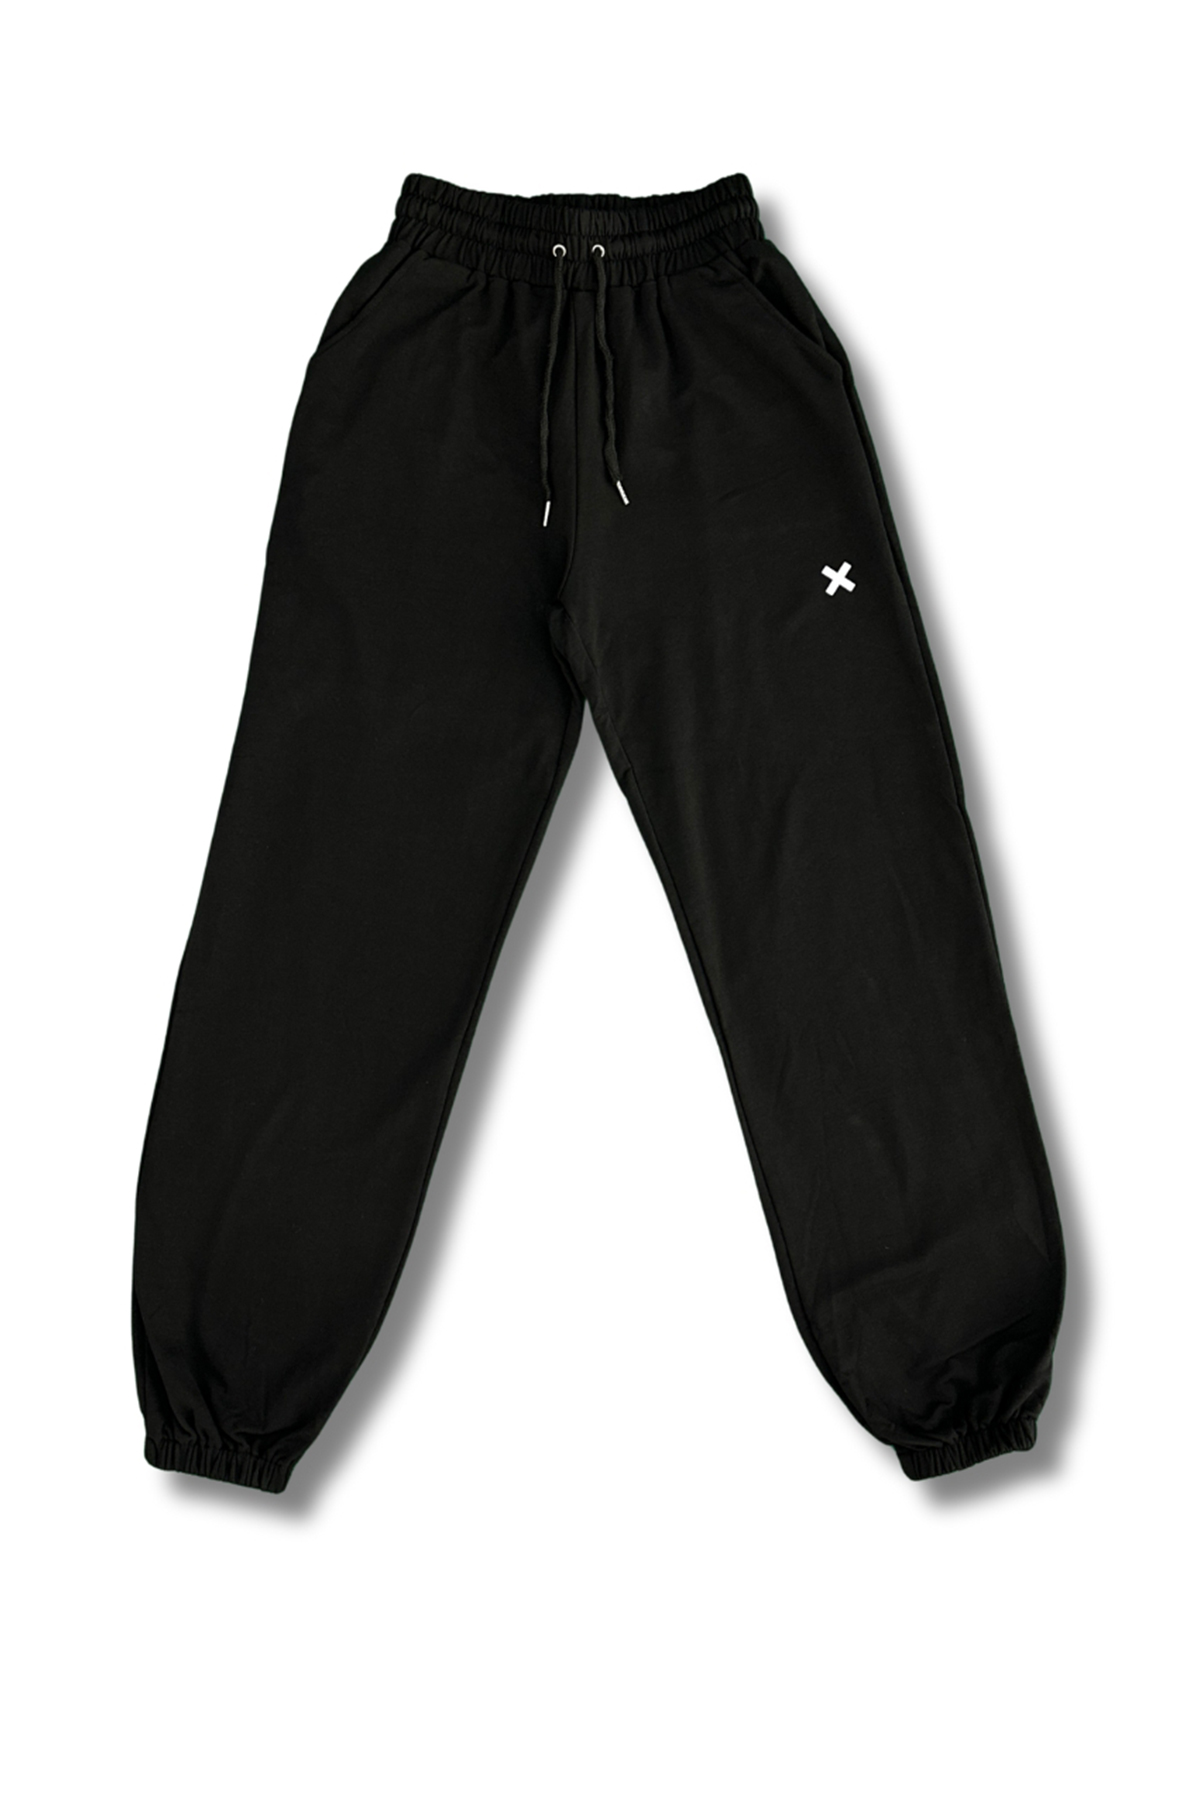 Time-Out-X-Women’s-Athletic-Joggers-black-front